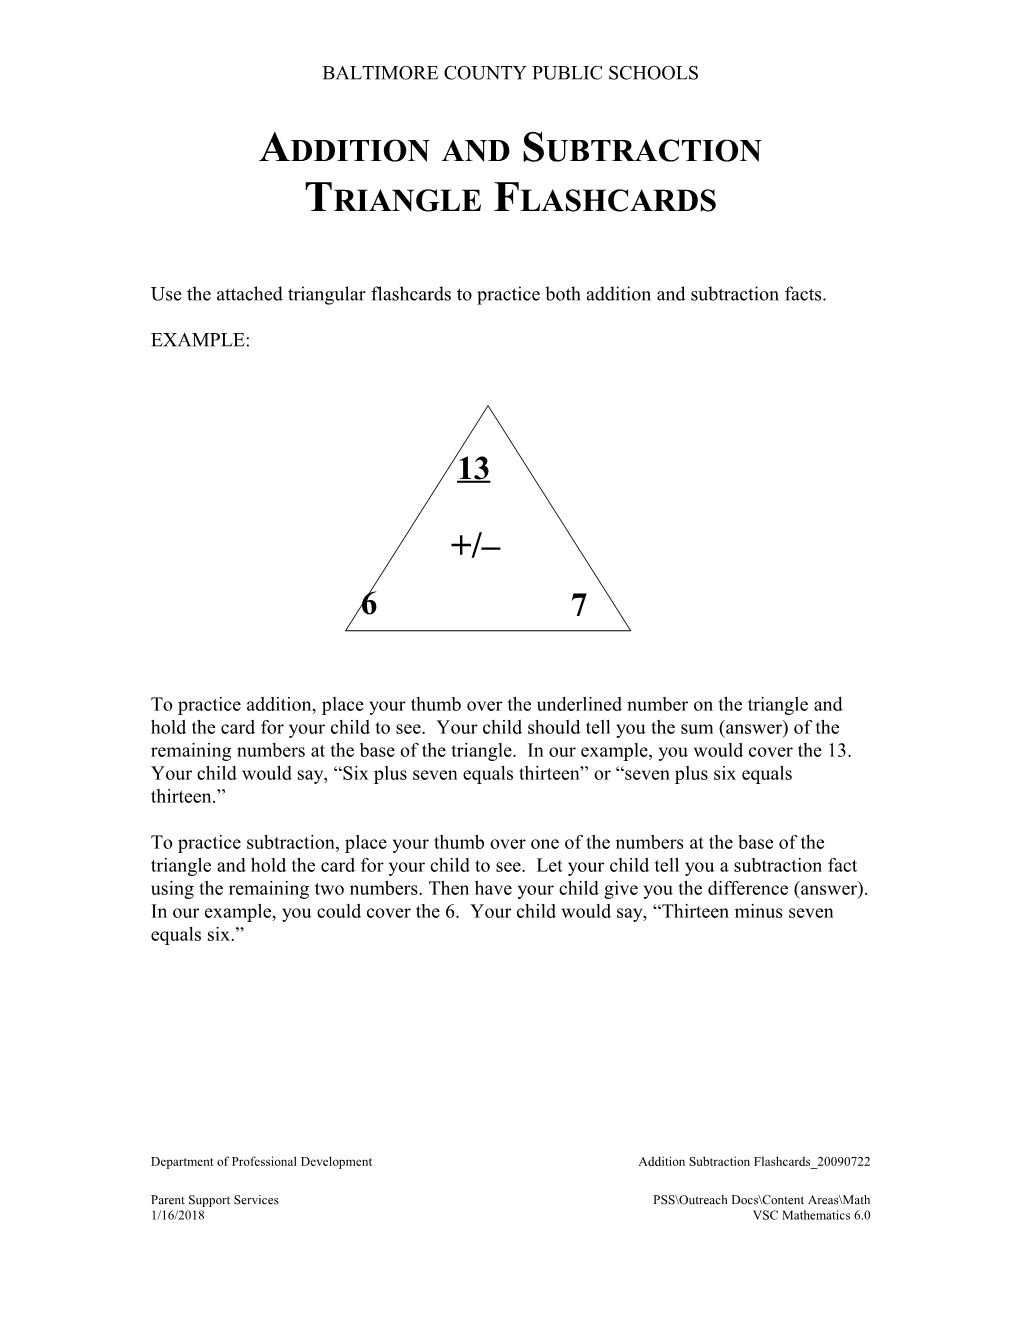 Use the Triangular Flash Cards to Practice Both Multiplication and Division Facts